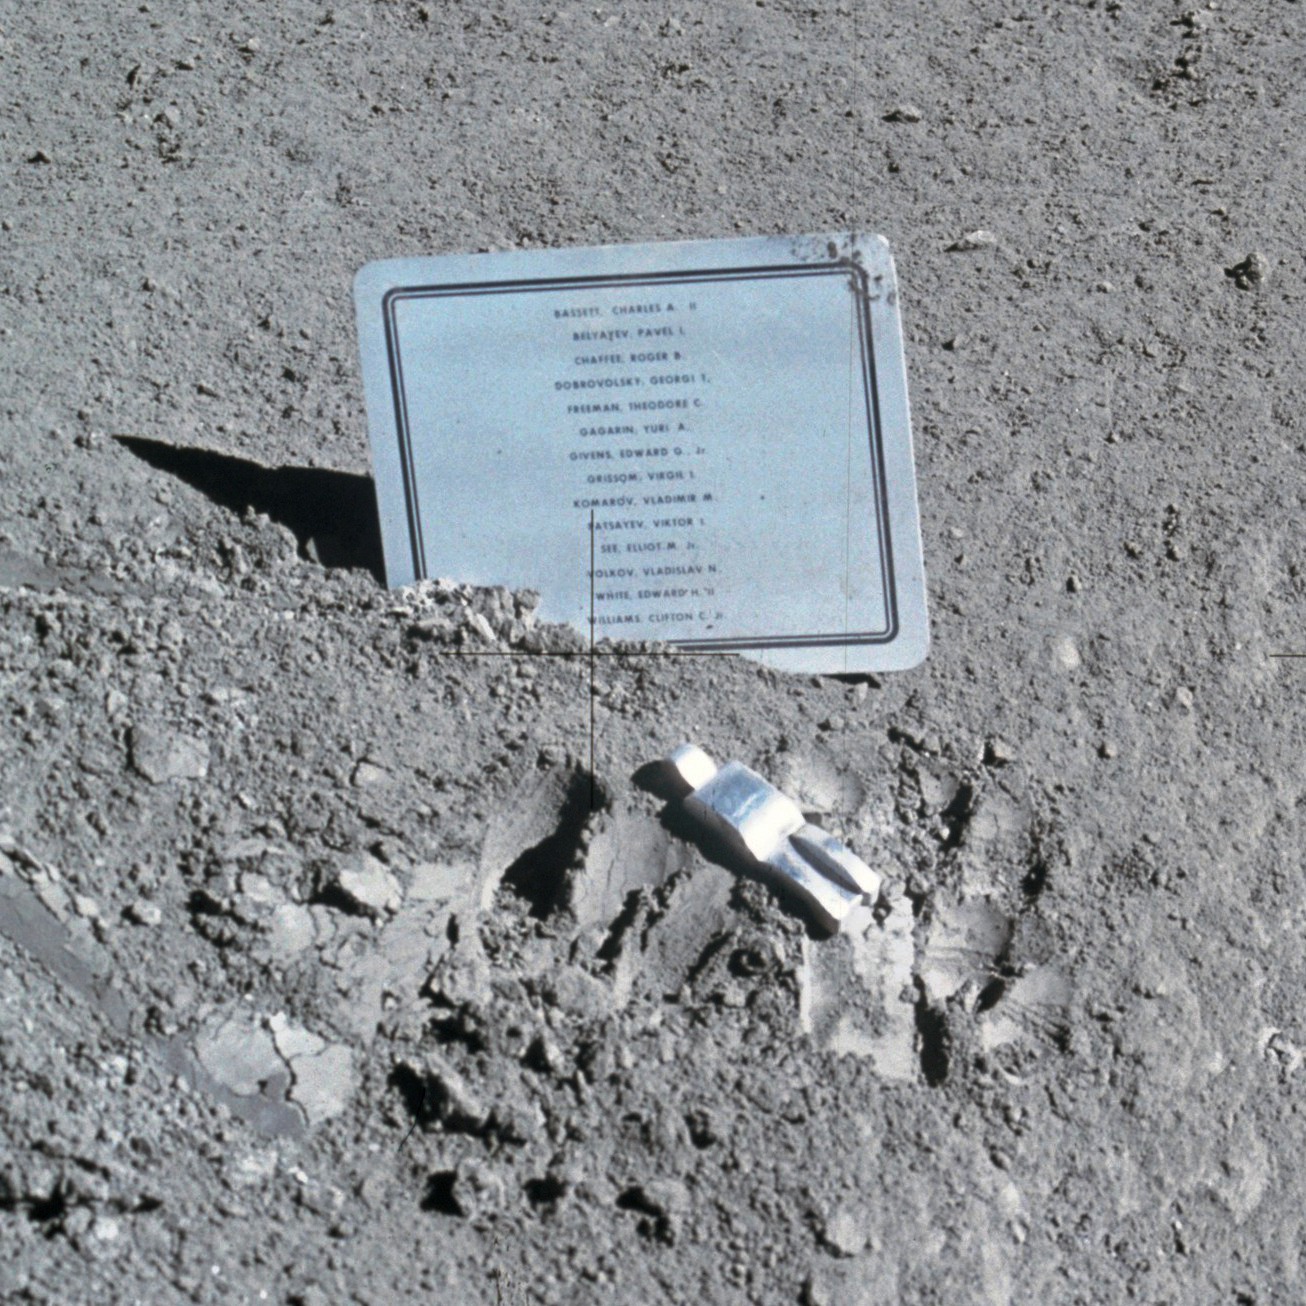 fascinating facts - In 1971, the U.S. left a memorial on the Moon for every astronaut who died in the pursuit of space exploration, including Russian Cosmonauts